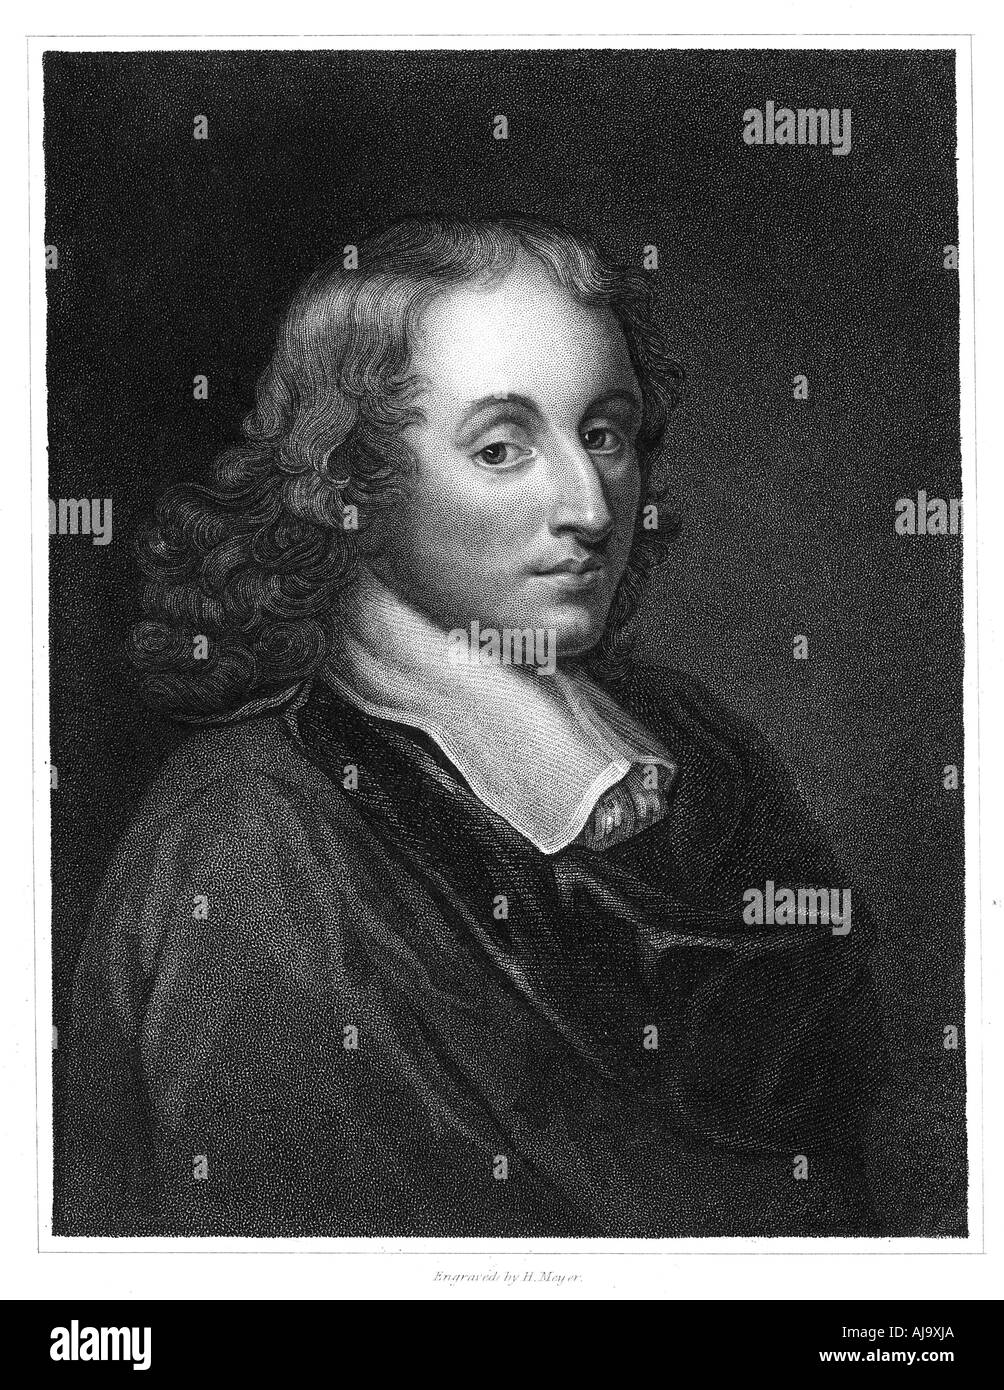 Blaise Pascal, 17th century French philosopher, mathematician, physicist and theologian, c1830. Artist: Henry Meyer Stock Photo